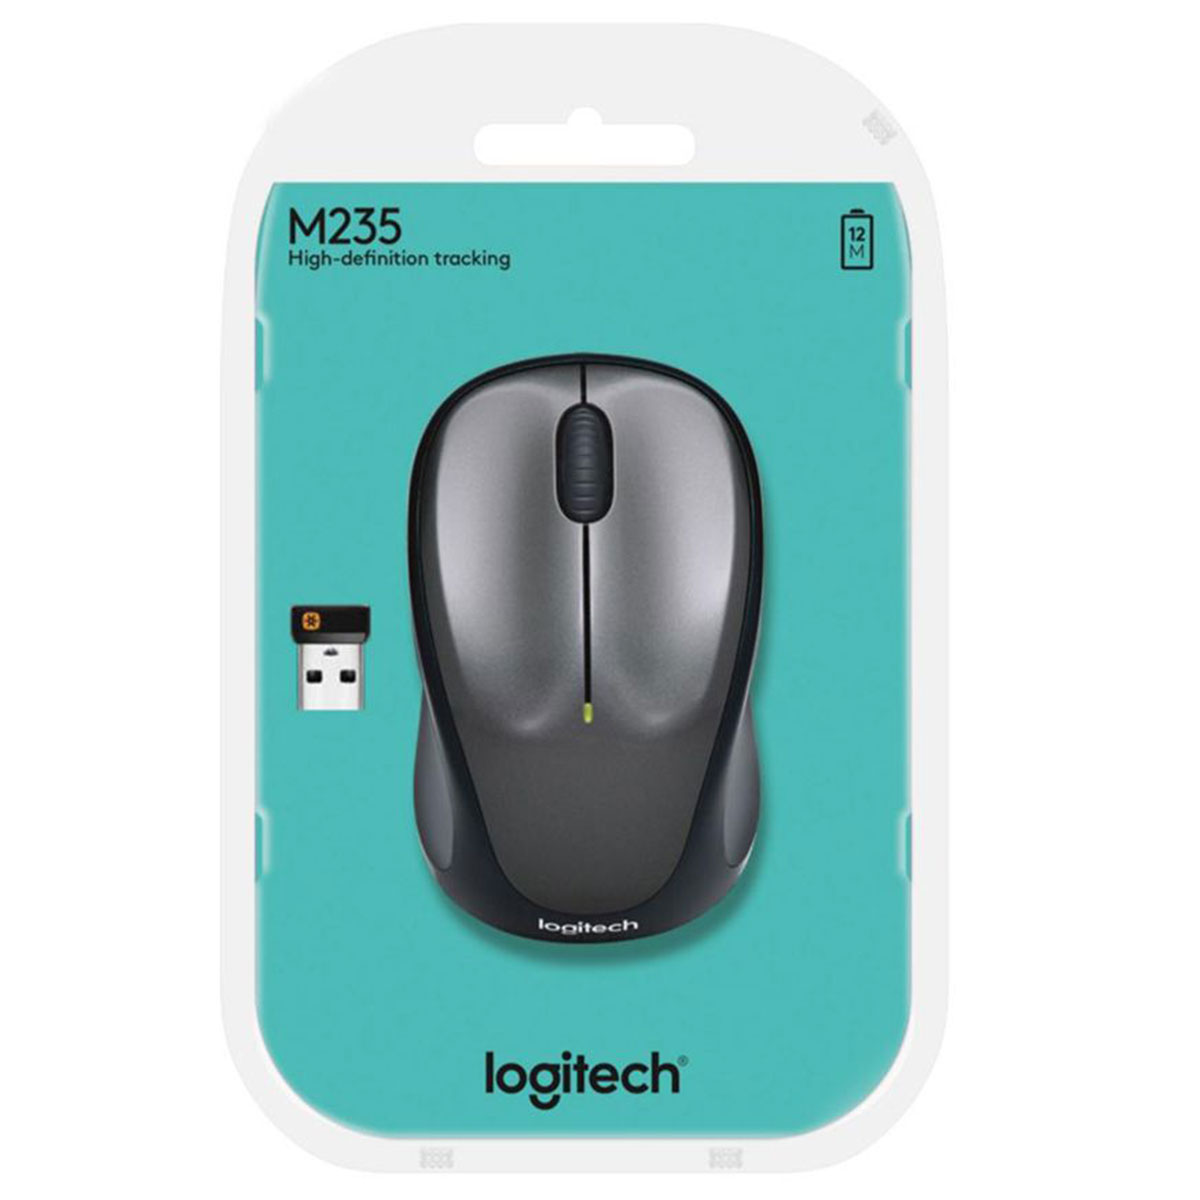 How to Connect Logitech Wireless Mouse to Unifying Receiver